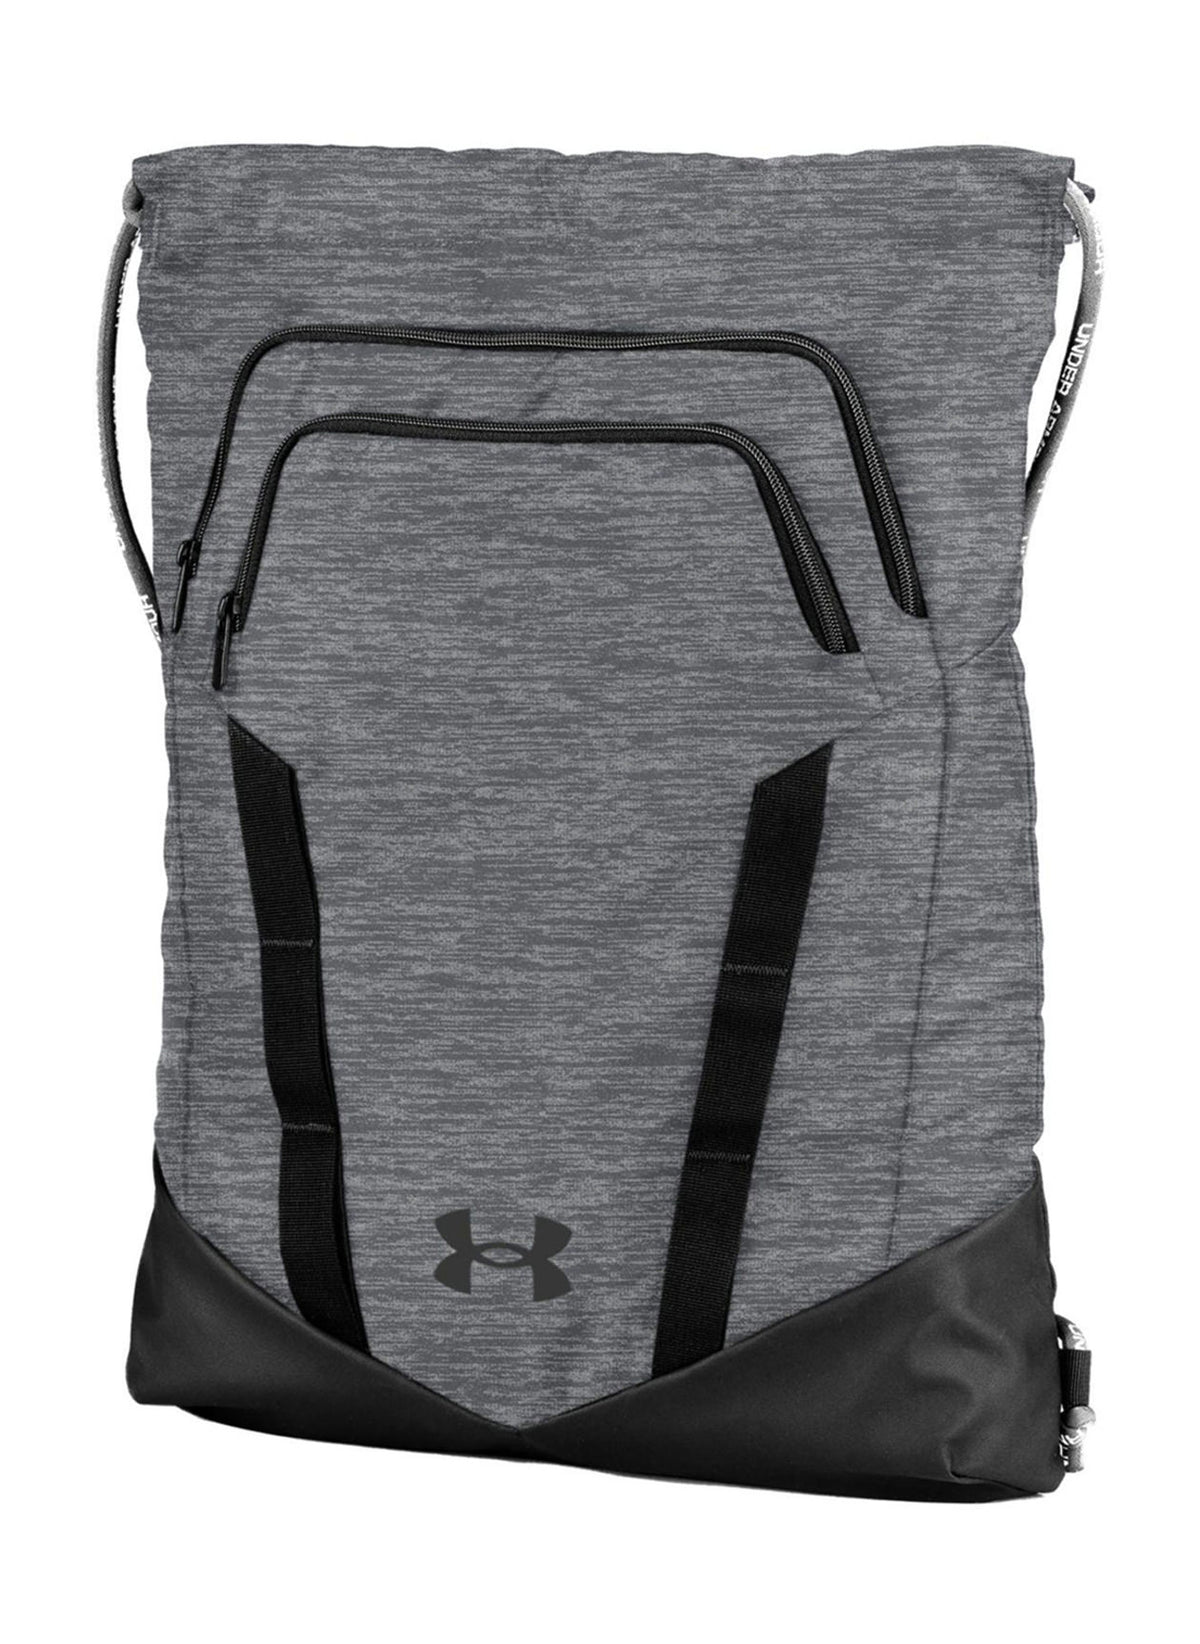 Under Armour Pitch Grey Novelty Undeniable Sackpack 2.0 |  Under Armour 瀝青灰色客製背包